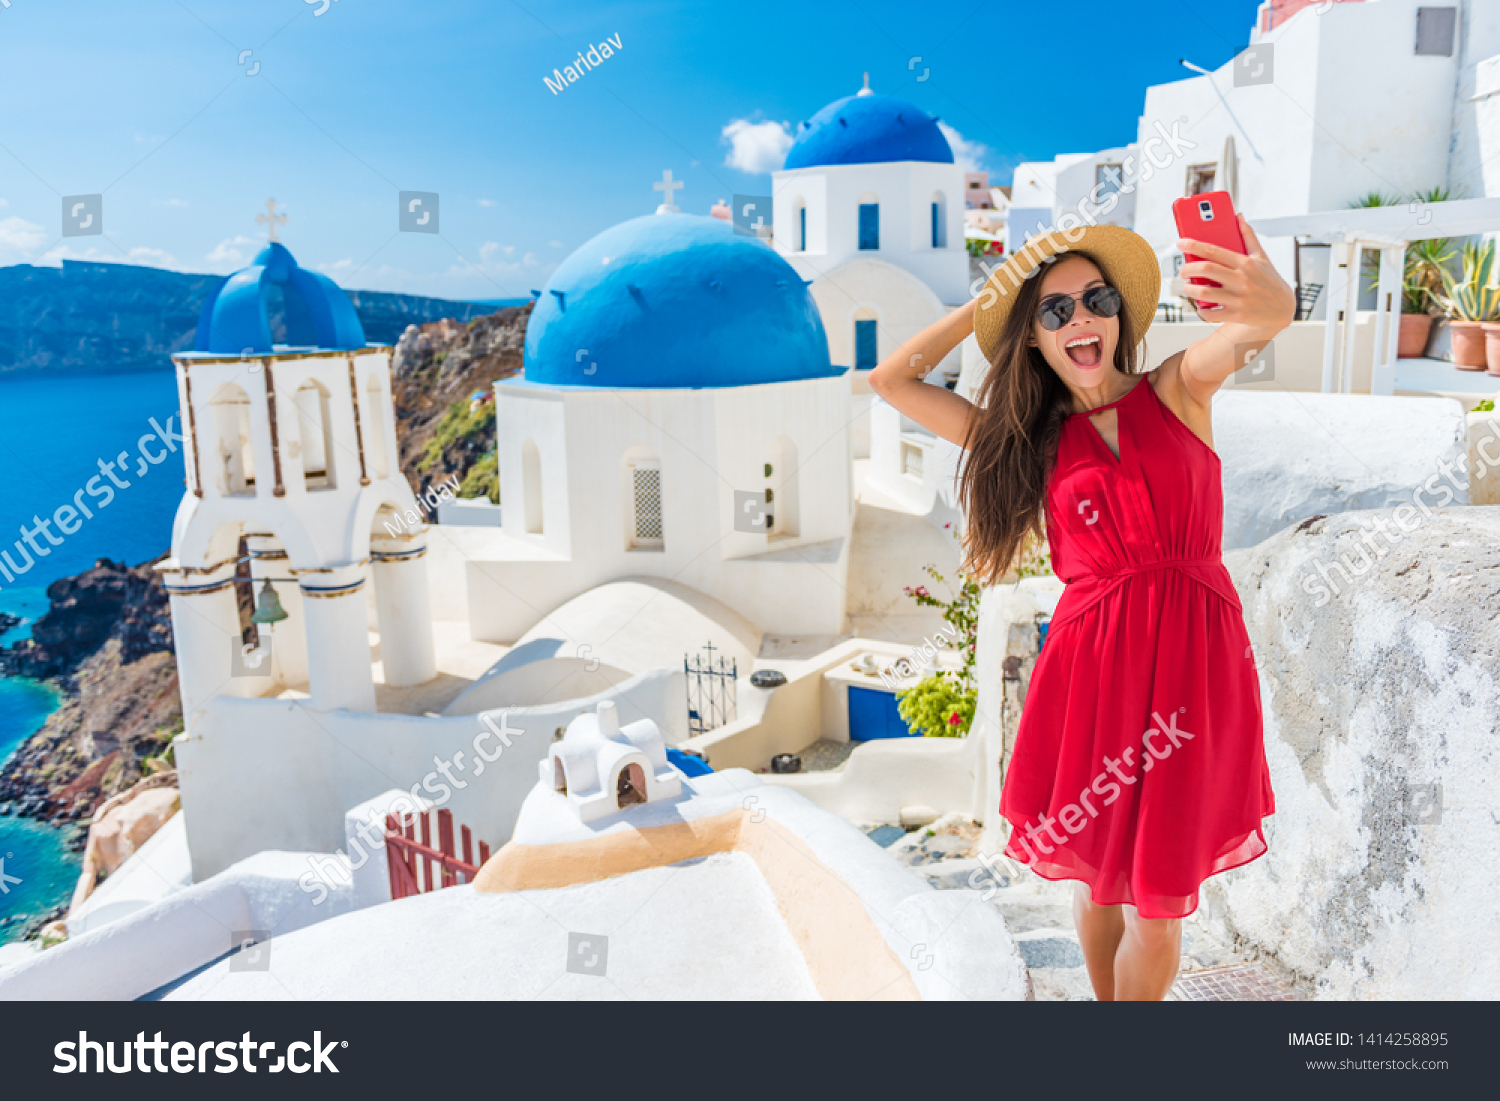 Santorini tourist girl on cruise holiday taking selfie photo with phone at famous three domes church, European tourism attraction in Greece. Asian woman on vacation. #1414258895